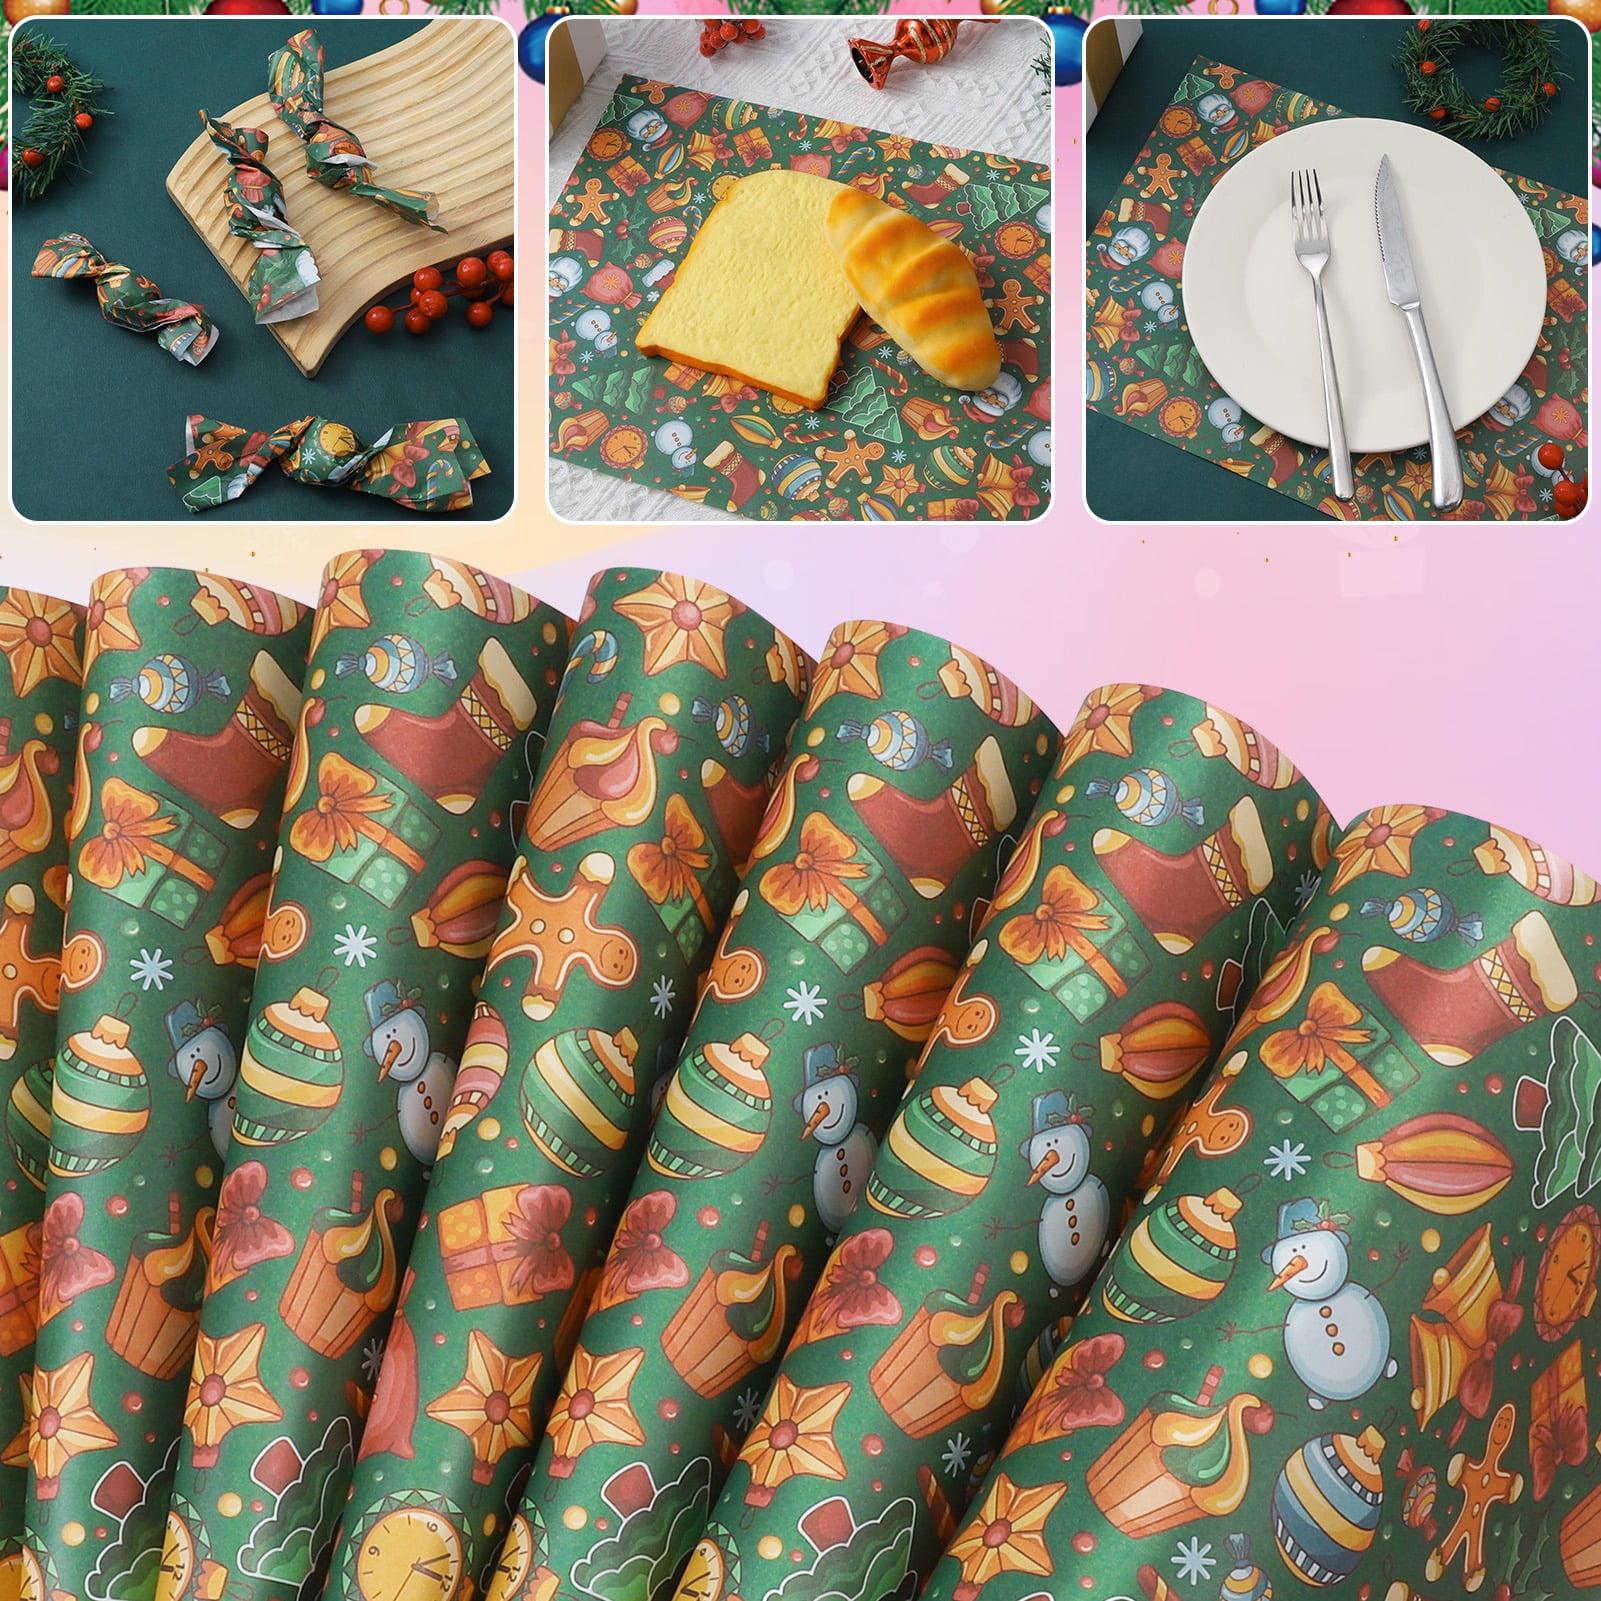  200 Pcs Christmas Wax Paper Sheets Sandwich Wrap Paper Elk  Snowflake Christmas Tree Chocolate Print Decorative Parchment Paper  Greaseproof Food Wrapping Basket Liners Deli Paper for Baking Cookie : Home  